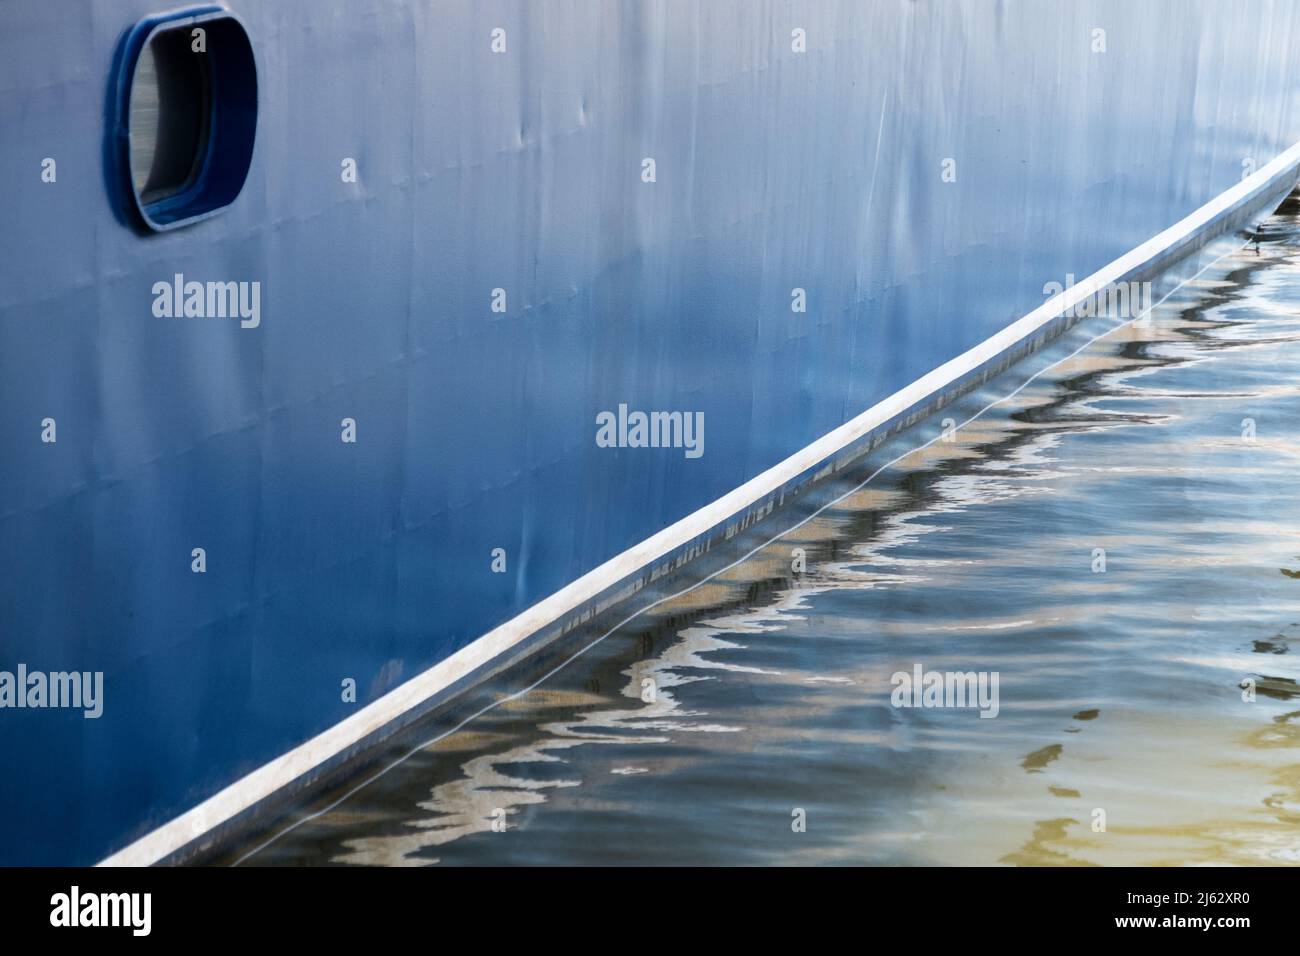 View of the blue hull of a boat and its reflection over the water at Punta del Este harbour, Maldonado, Uruguay Stock Photo